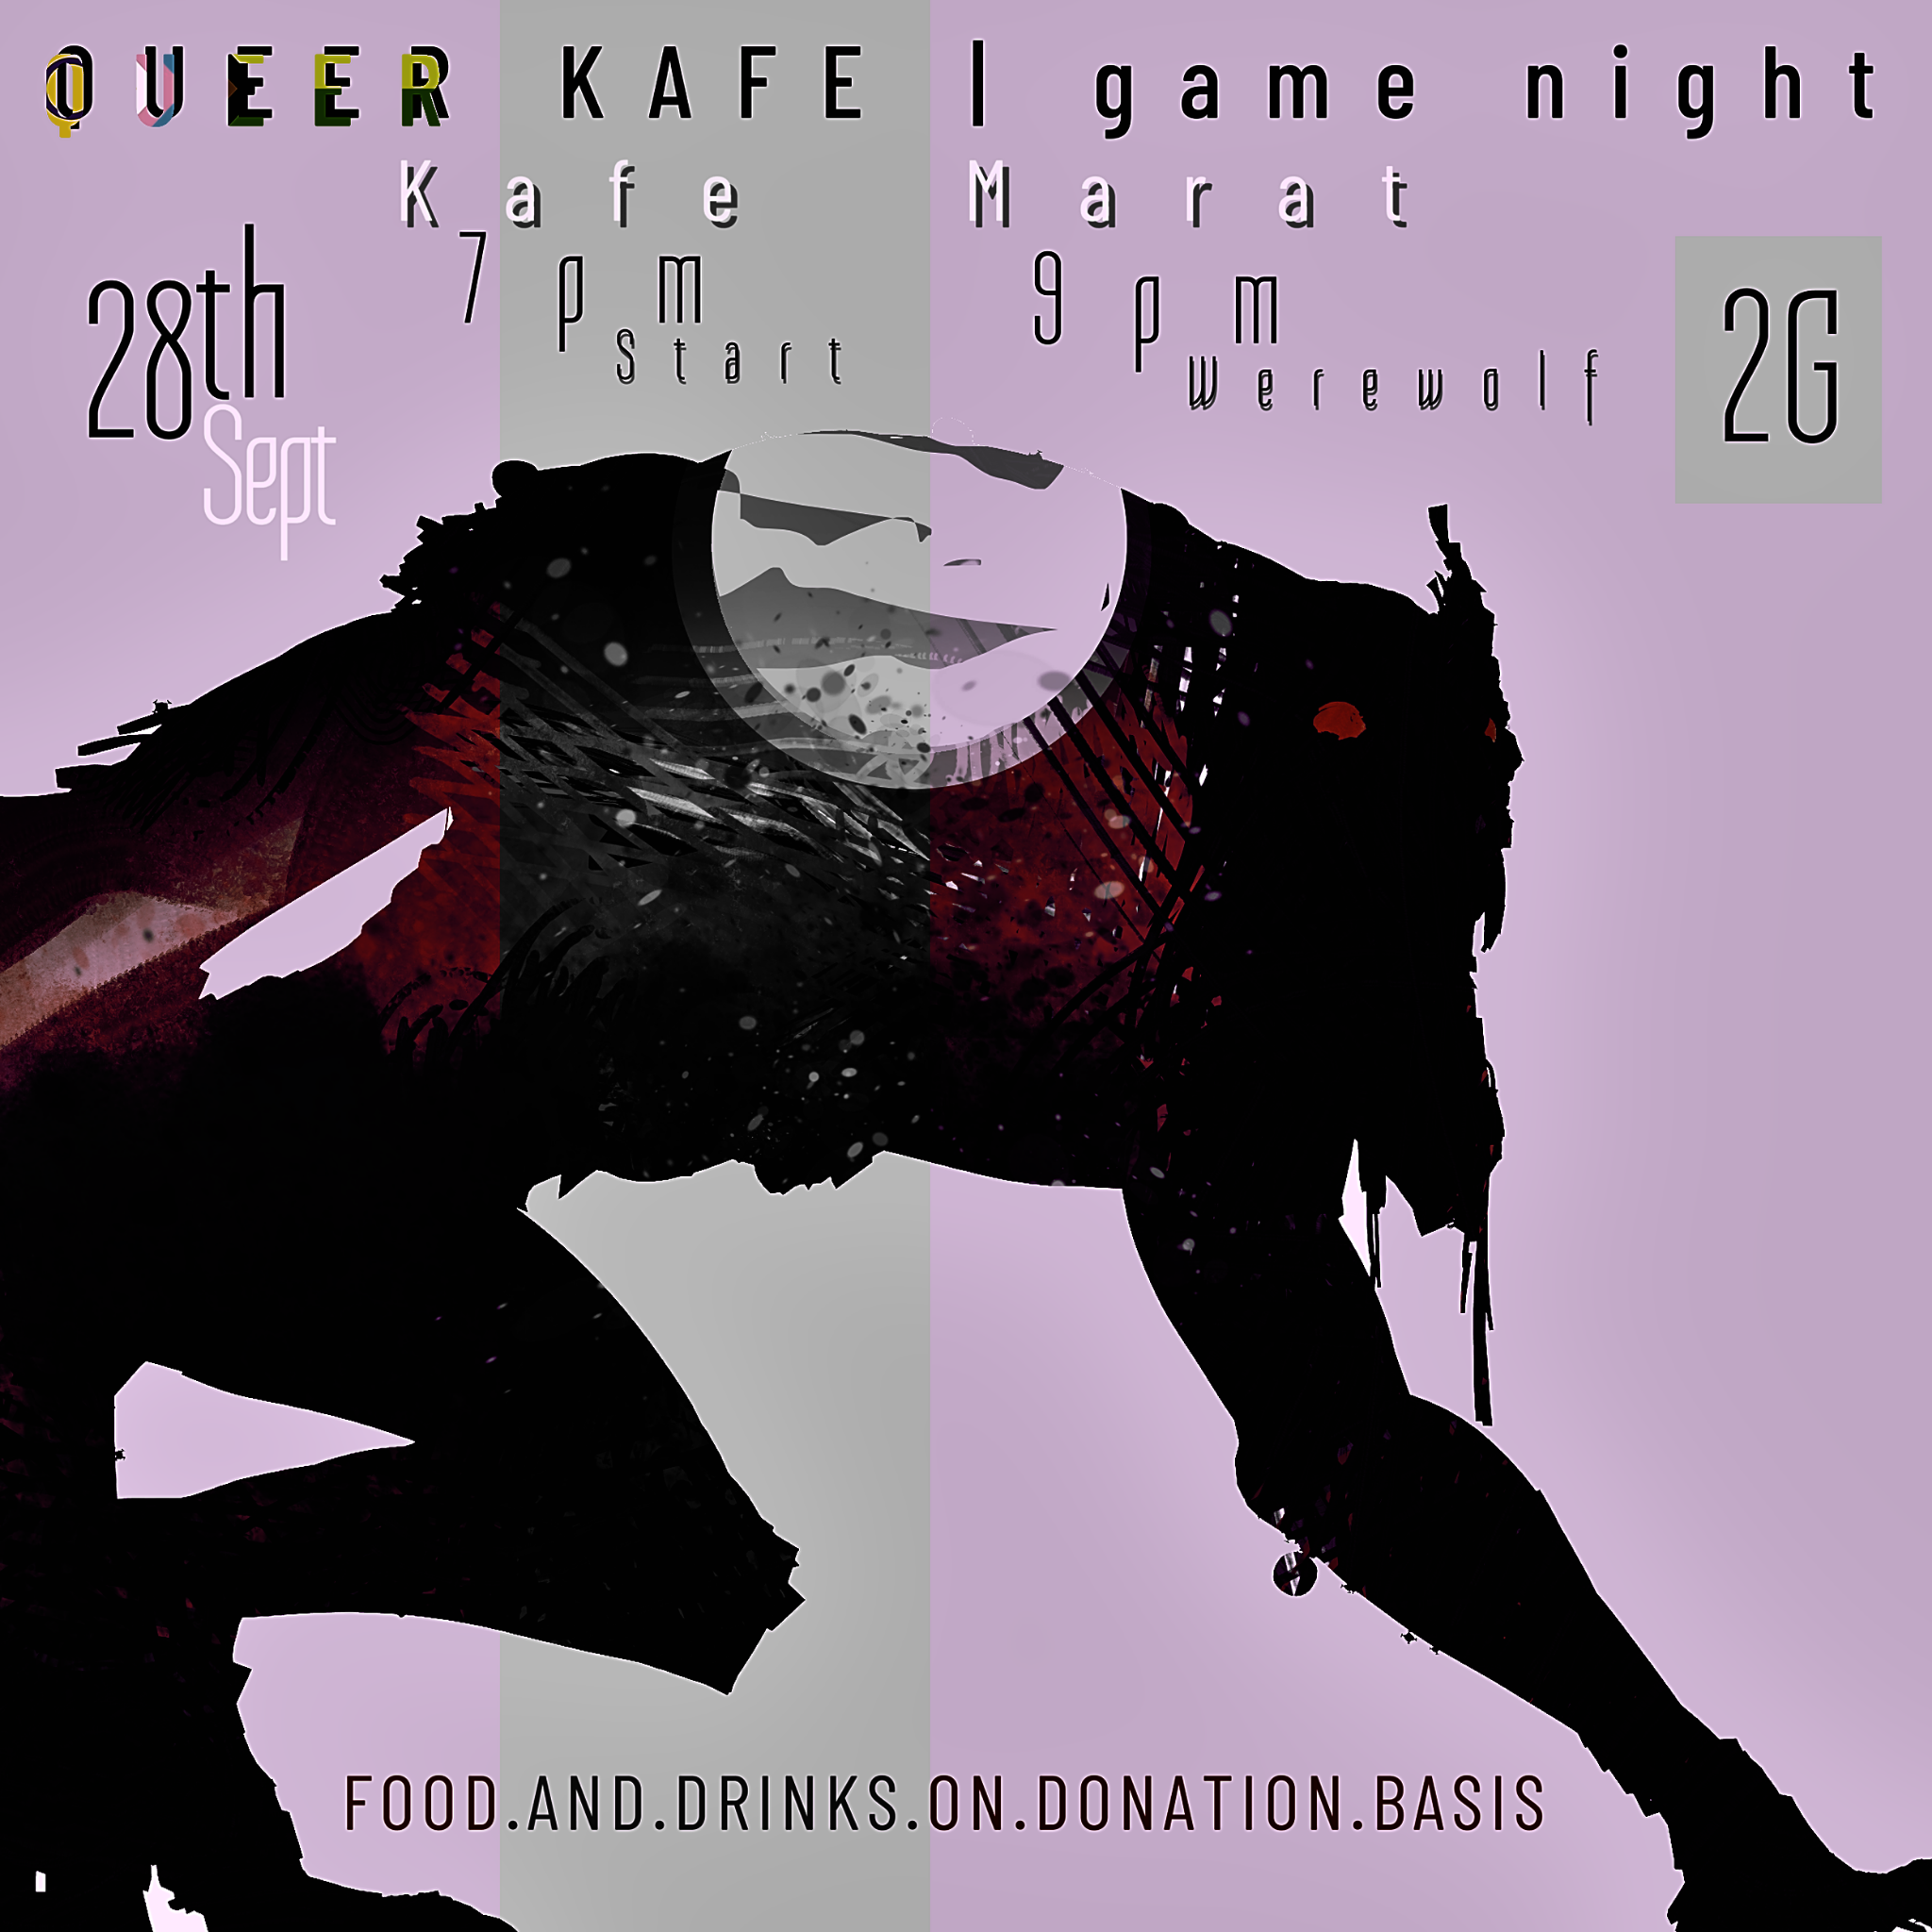 On a light pink and gray background, a large black werewolf silhouette crouches in the frame.Queer Kafe game night. In Kafe Marat on Sept 28th from 7pm. Werewolf game from 9pm. 2G. Food and drink on donation basis.